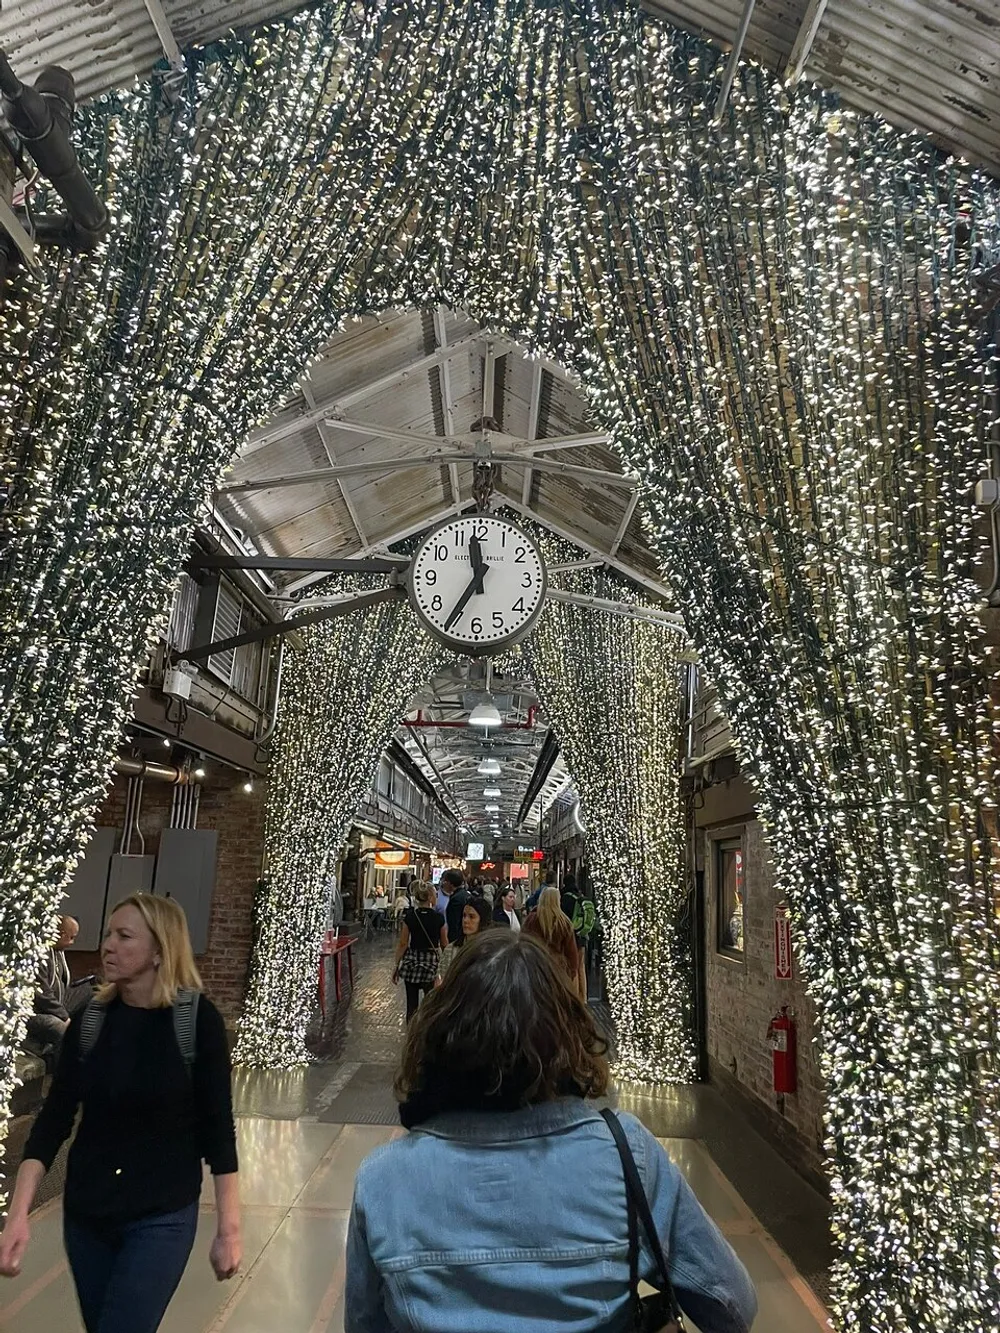 A bustling indoor corridor is adorned with a dazzling canopy of twinkling lights beneath which people stroll past a prominent hanging clock displaying the time